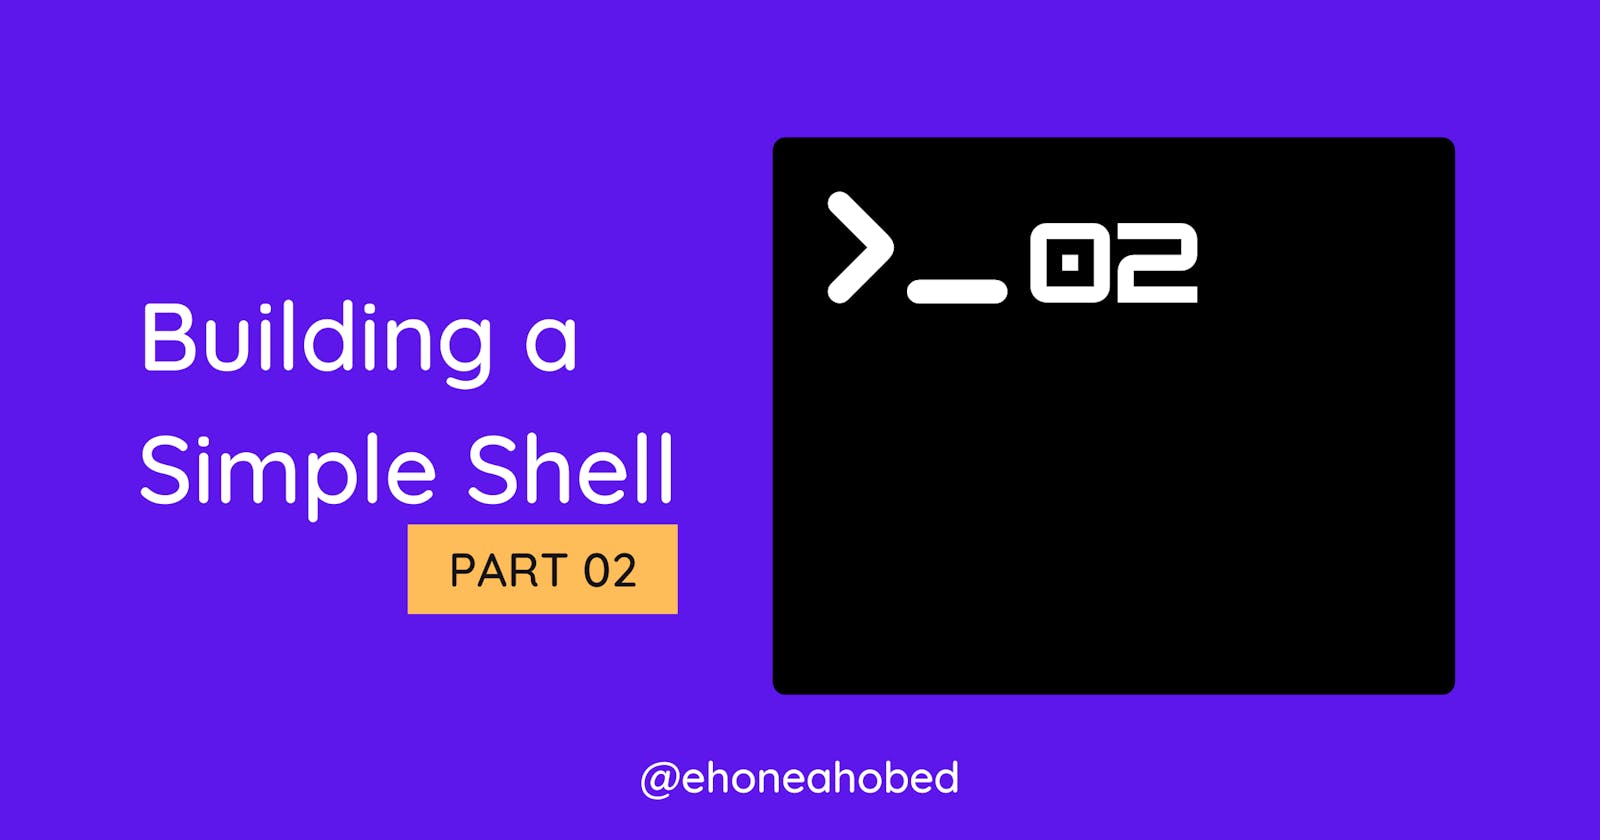 Building a simple shell in C - Part 2